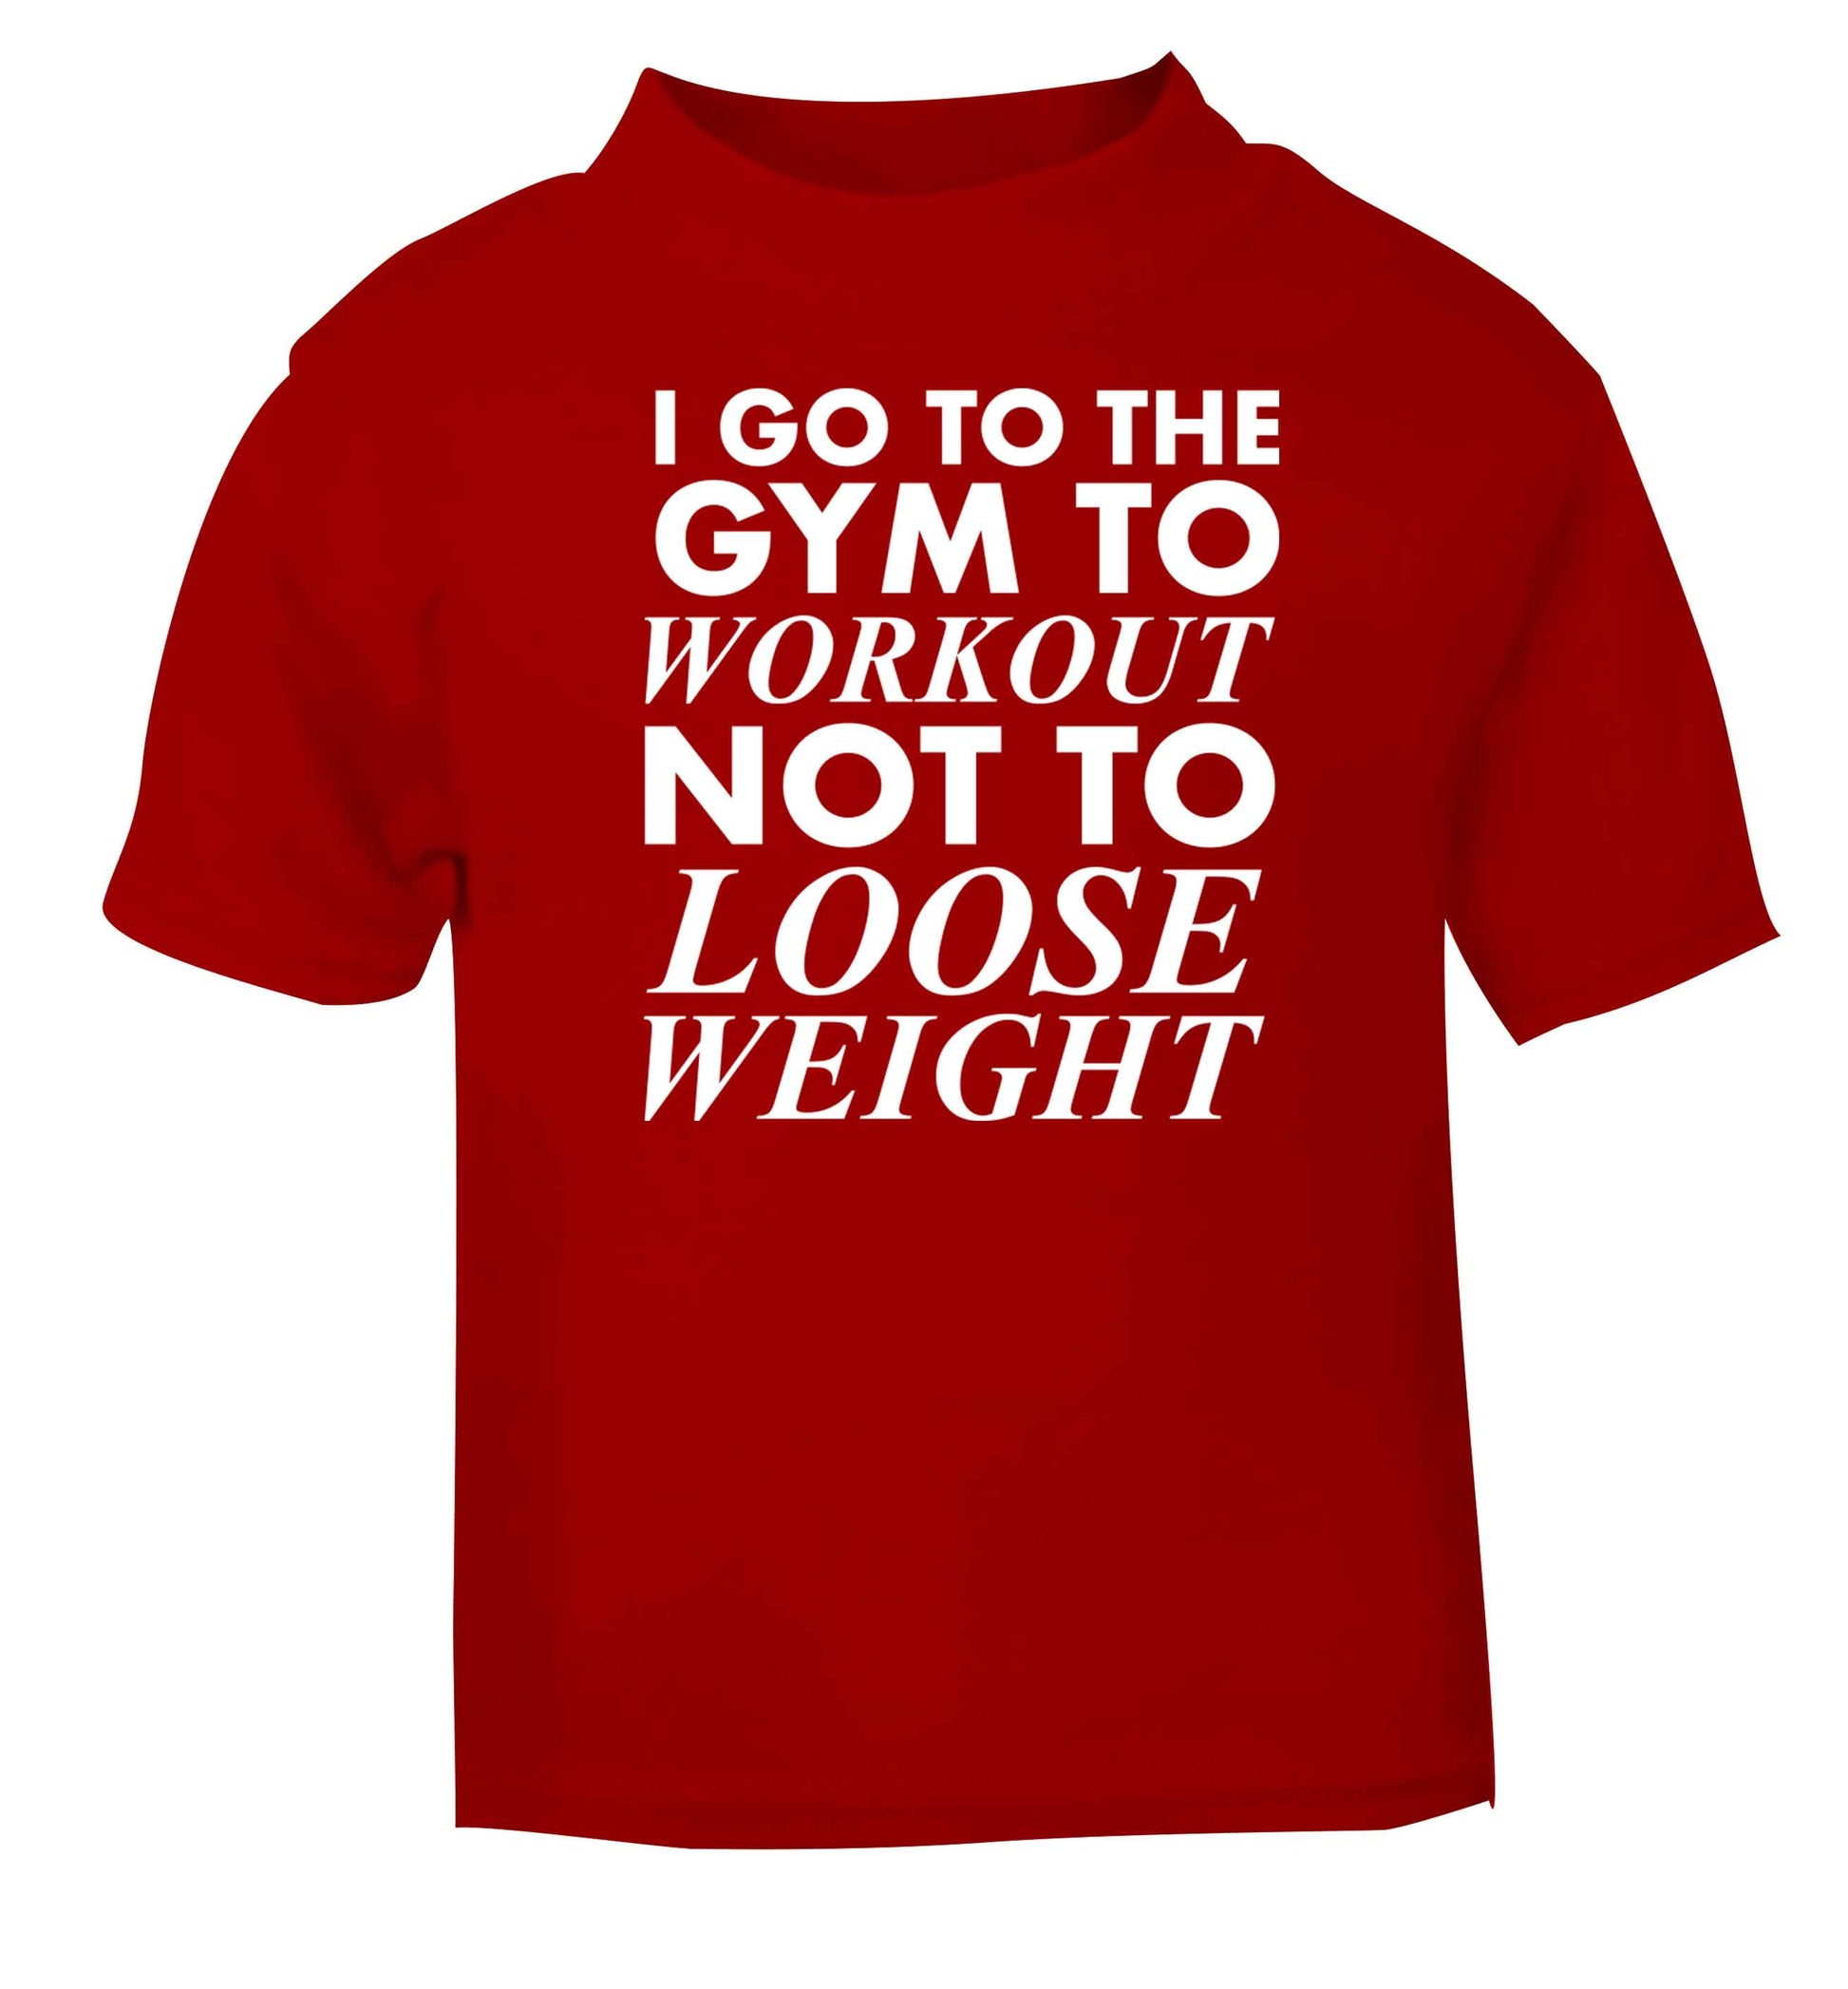 I go to the gym to workout not to loose weight red baby toddler Tshirt 2 Years